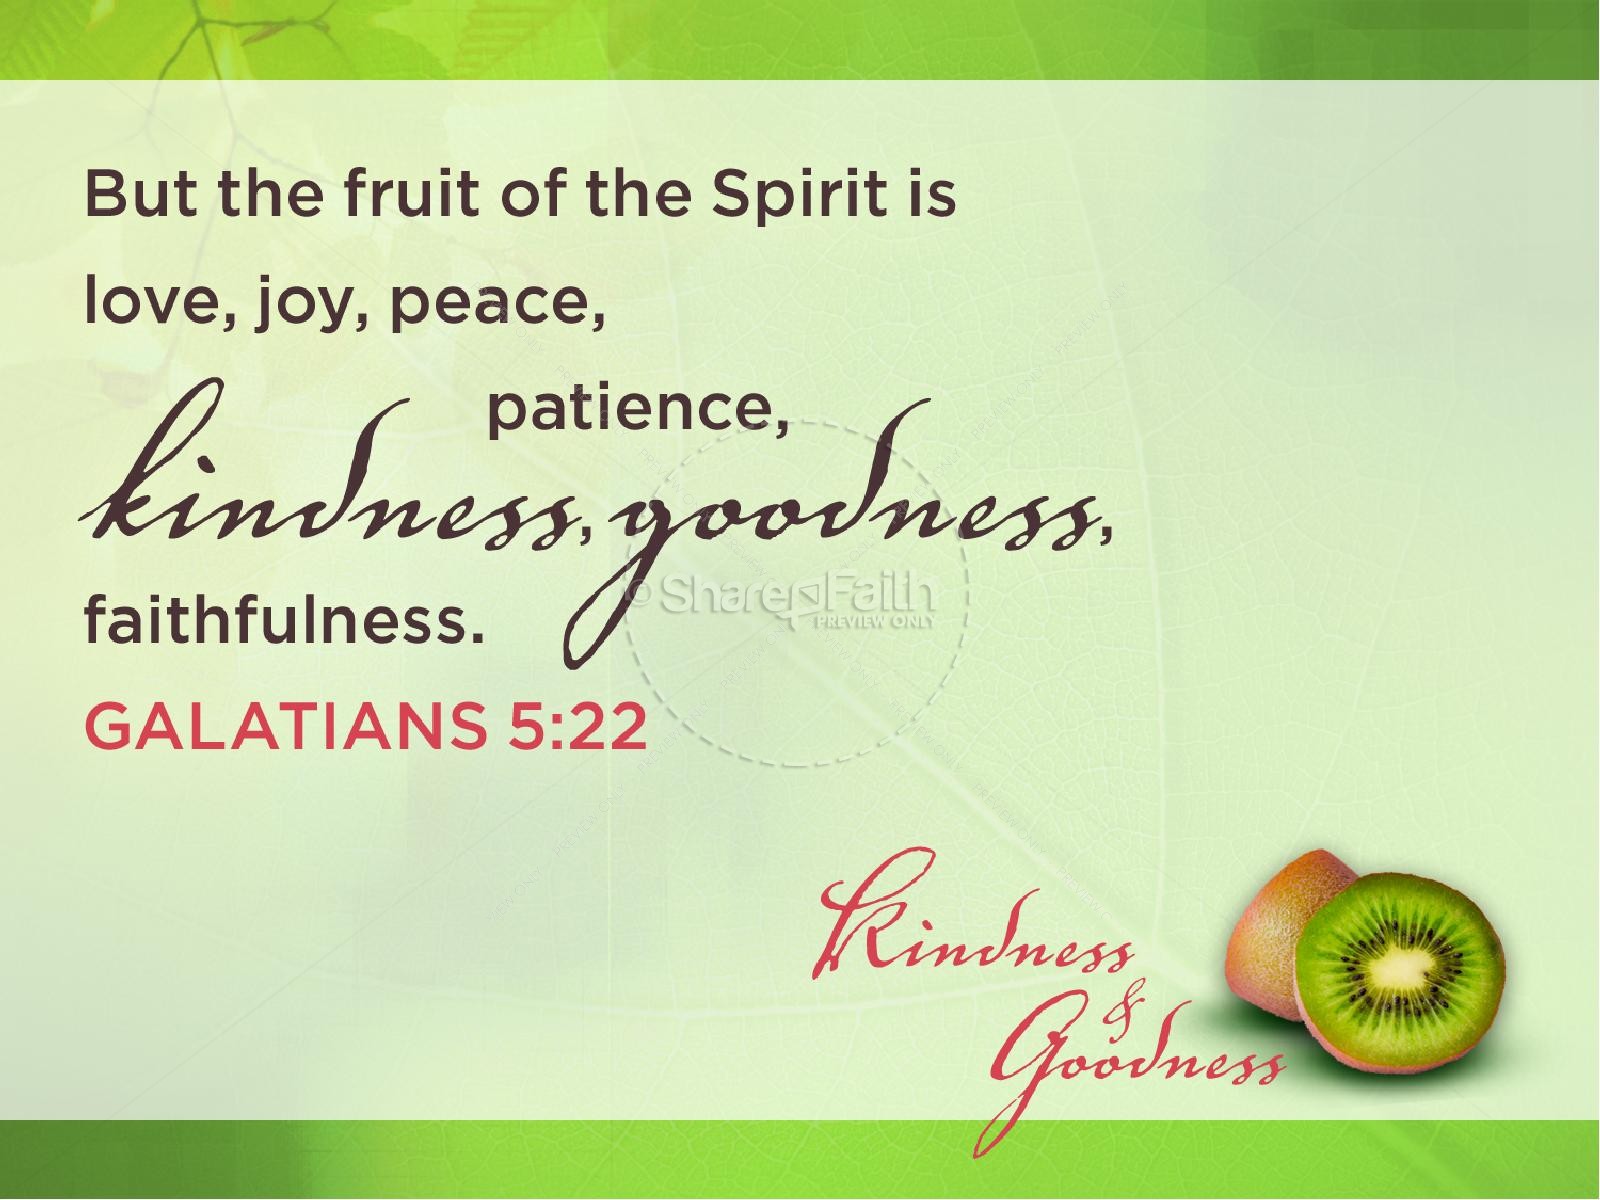 Kindness and Goodness Fruit of the Spirit PowerPoint Template Thumbnail 7